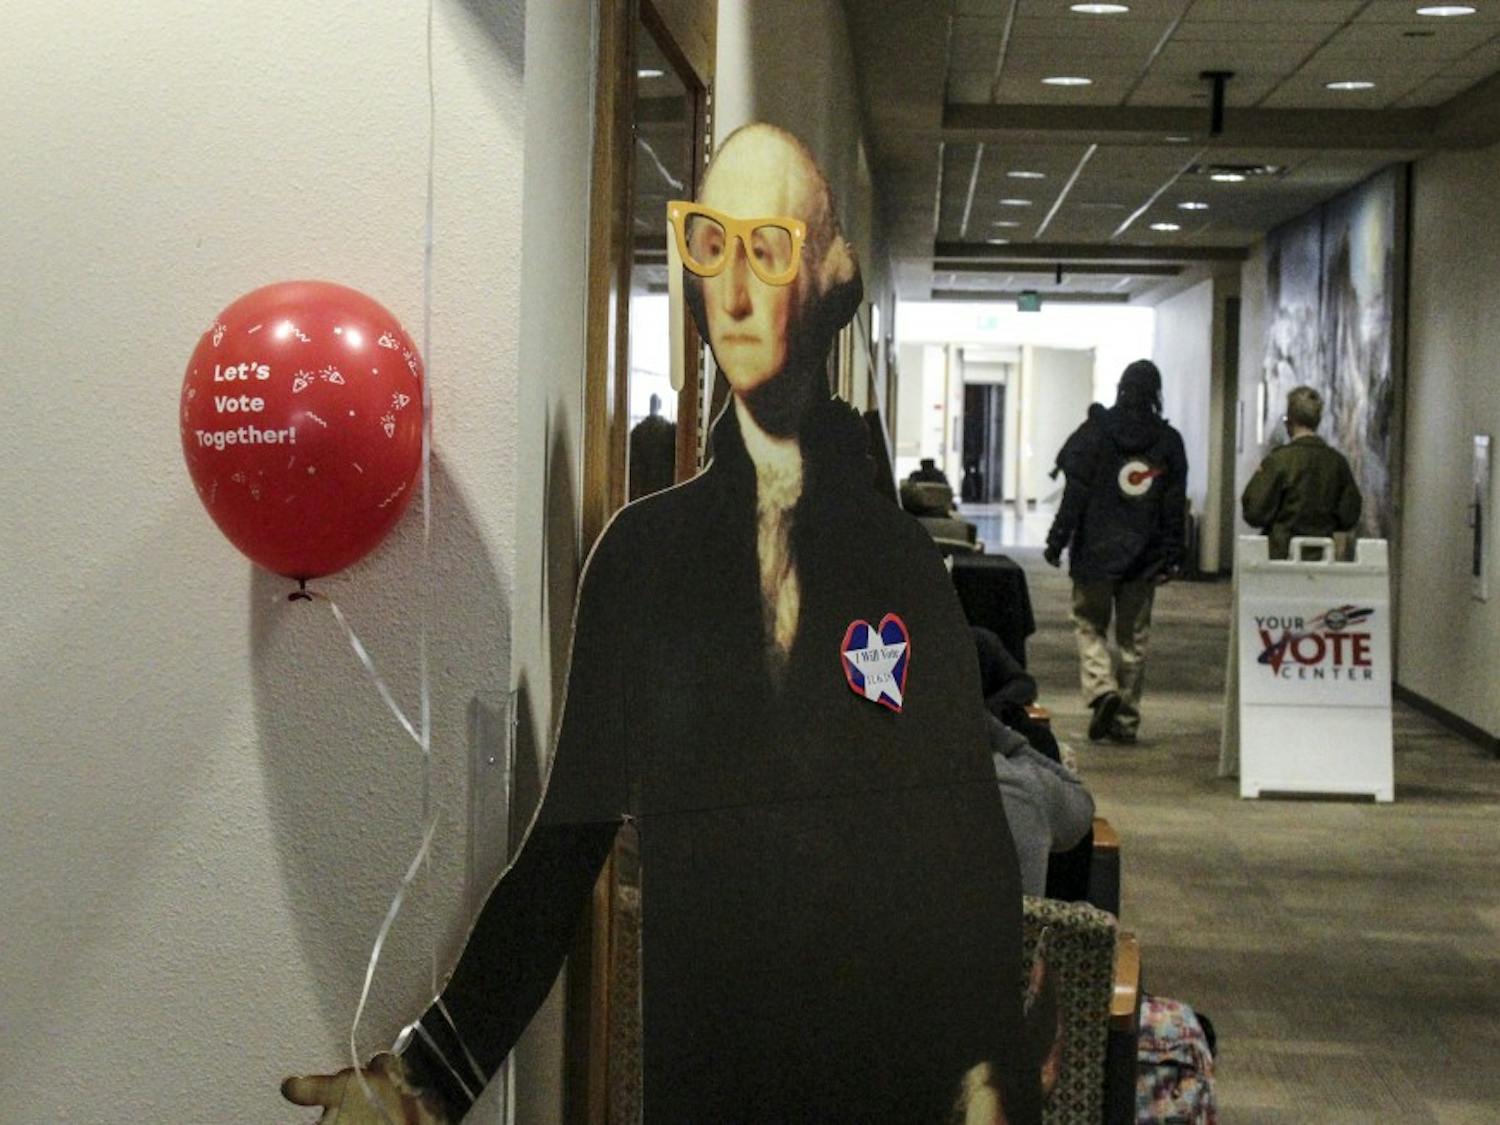 A cutout of George Washington welcomes party goers to the MitzVote voting party held by UNM Hallel Thursday, Nov. 3 in the UNM student union building.